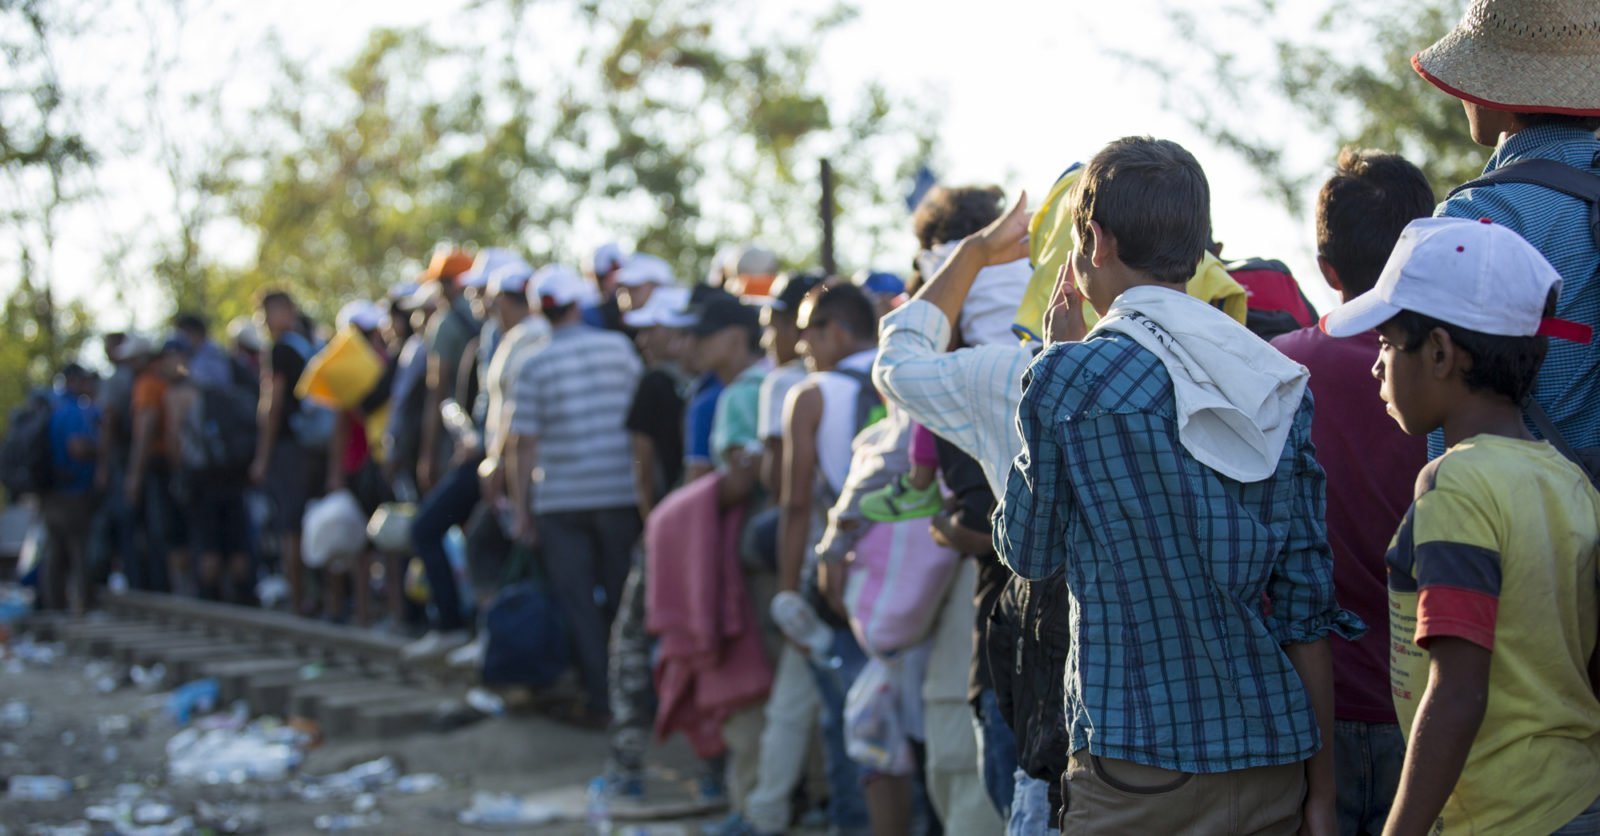 A long line of refugees, many holding personal possessions, waiting at the Greece-Macedonian border.